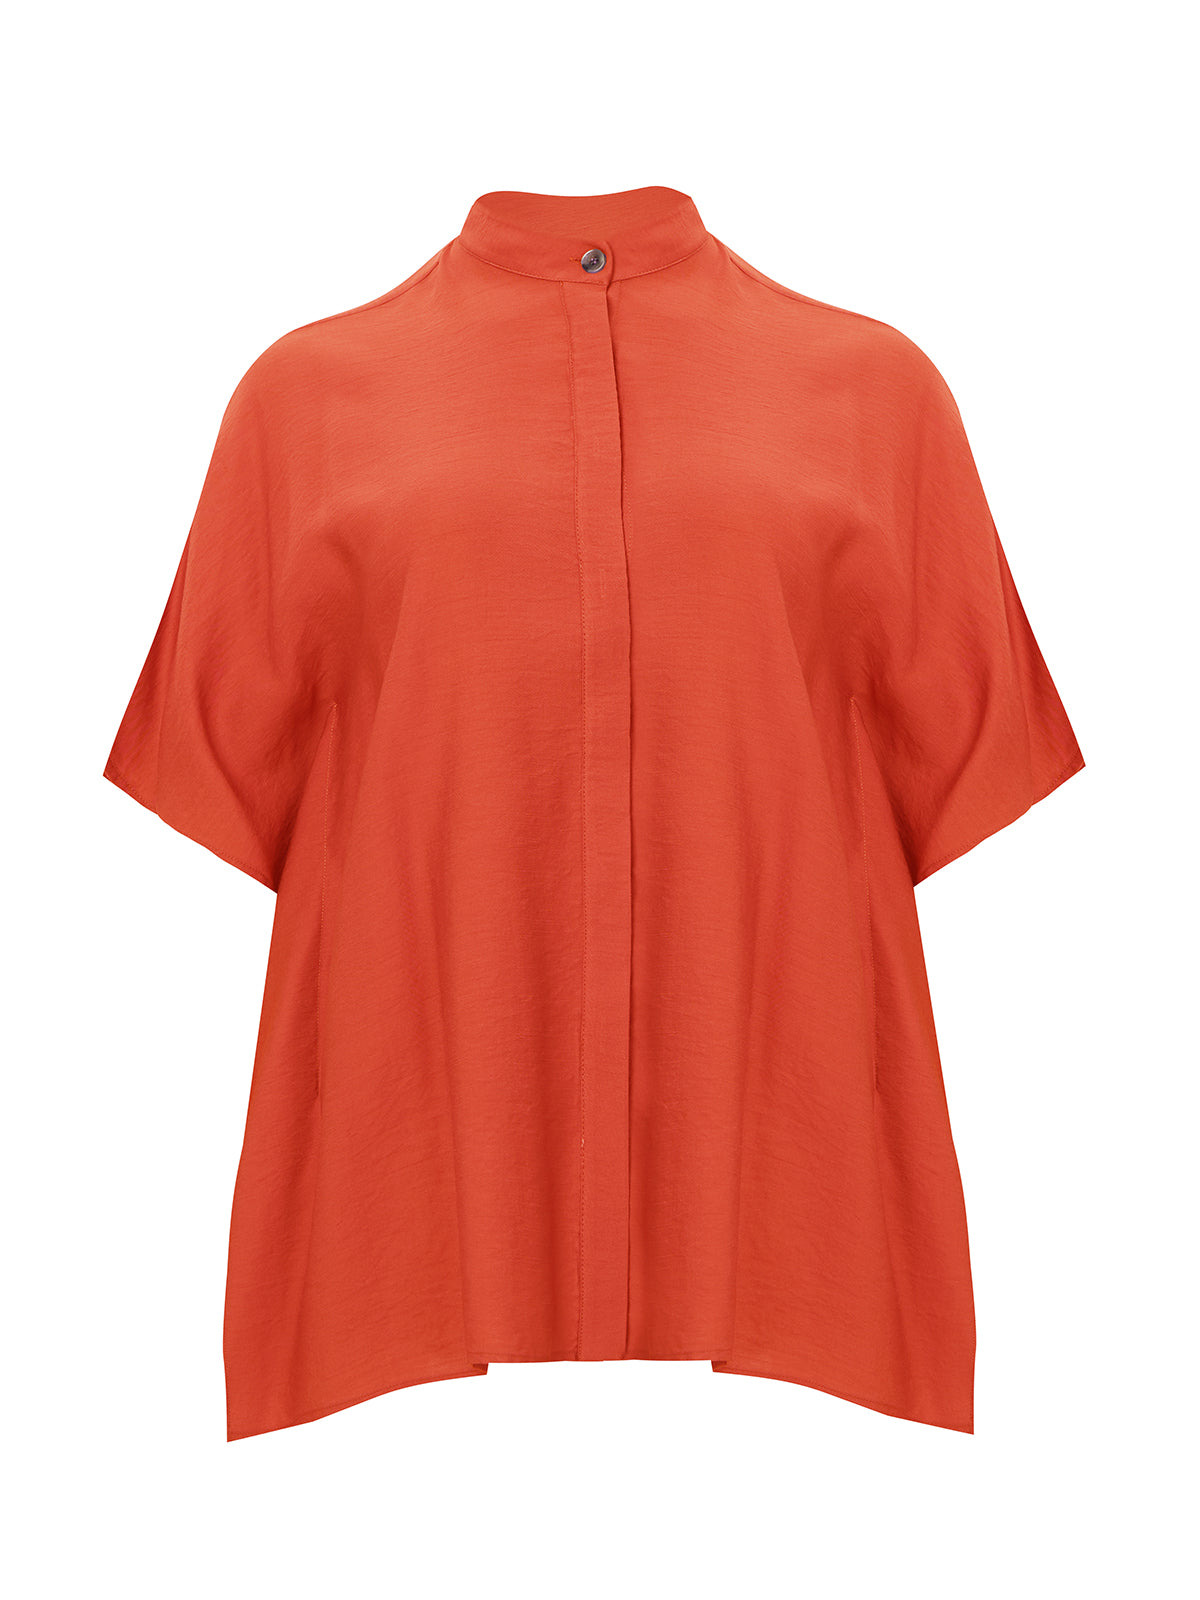 Mat Button Down Shirt in Coral